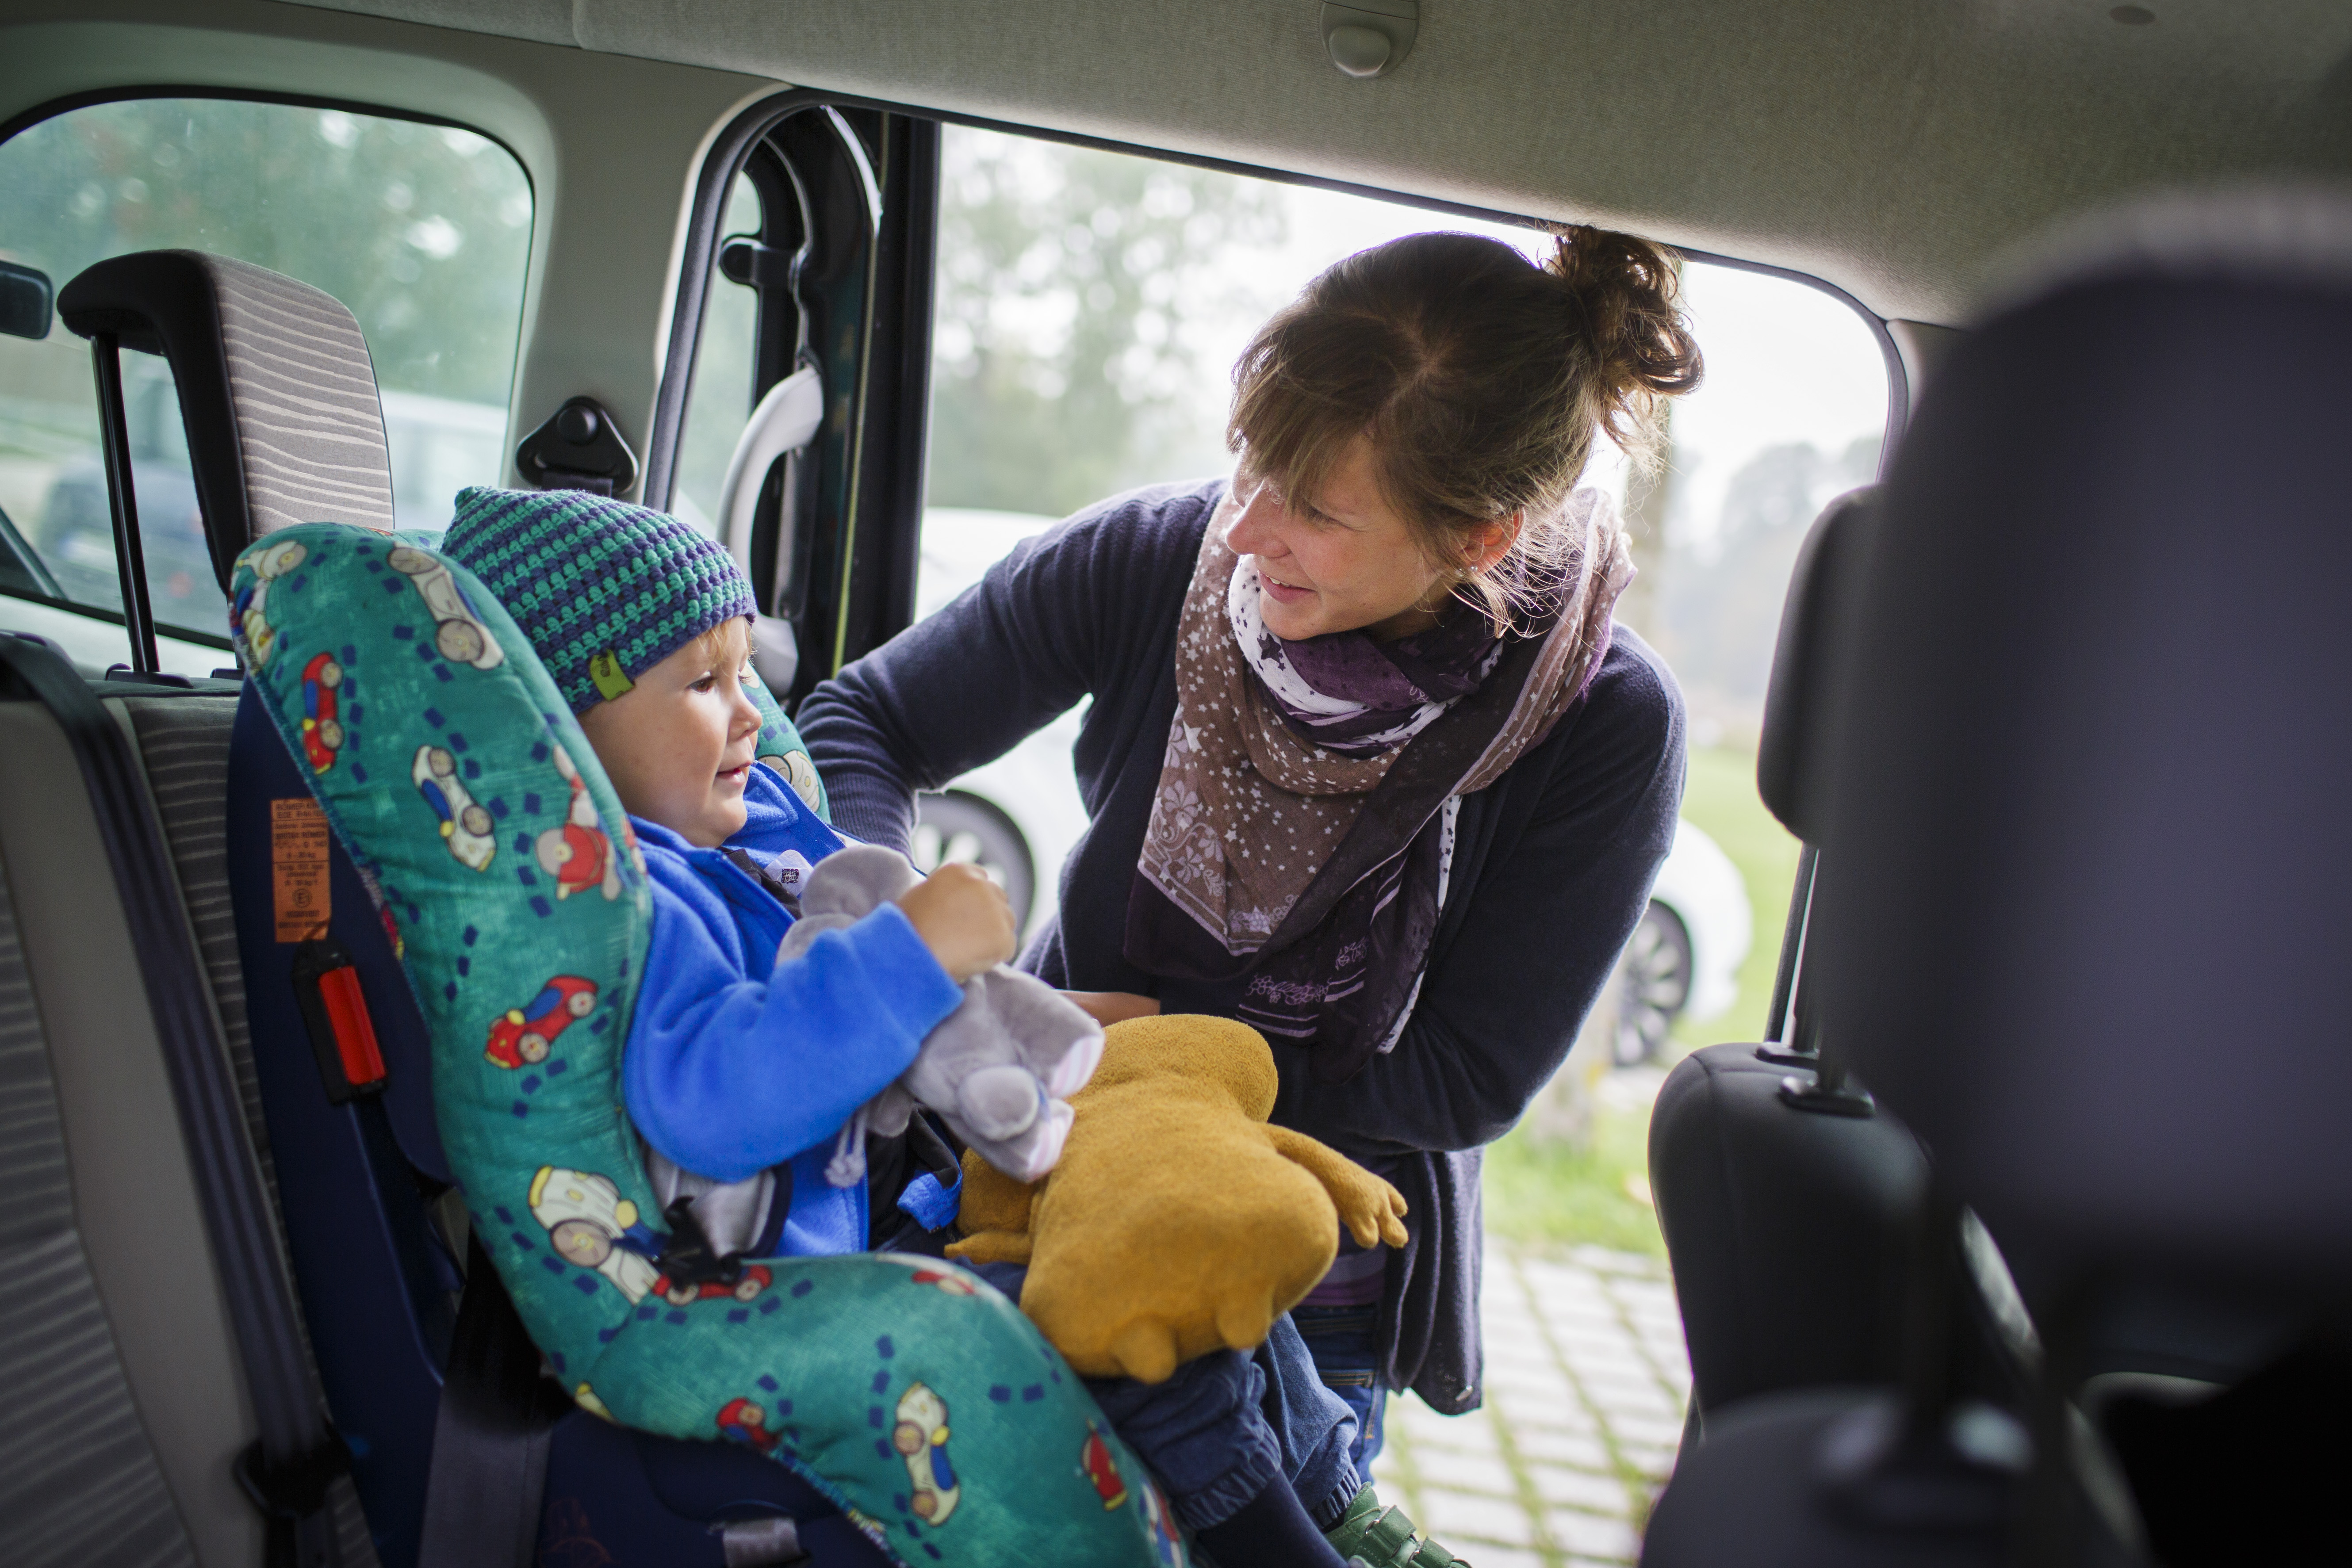 10 Best Winter Car Seat Covers For Your Baby - Cozy Covers For Car Seats